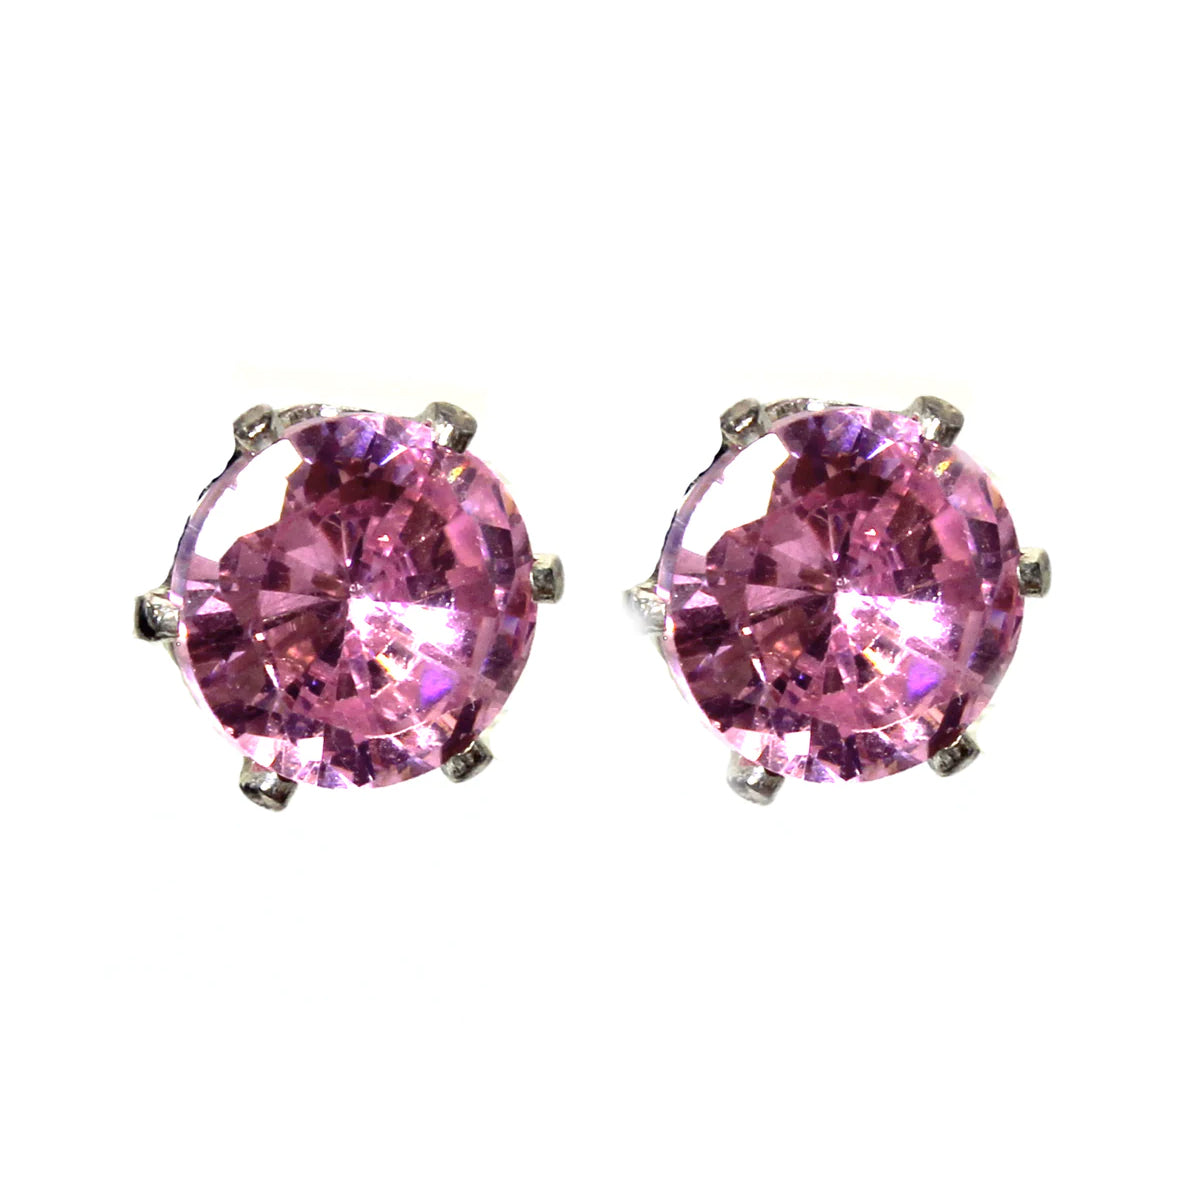 Round Cubic Zirconia Earrings, variety, 0.25"